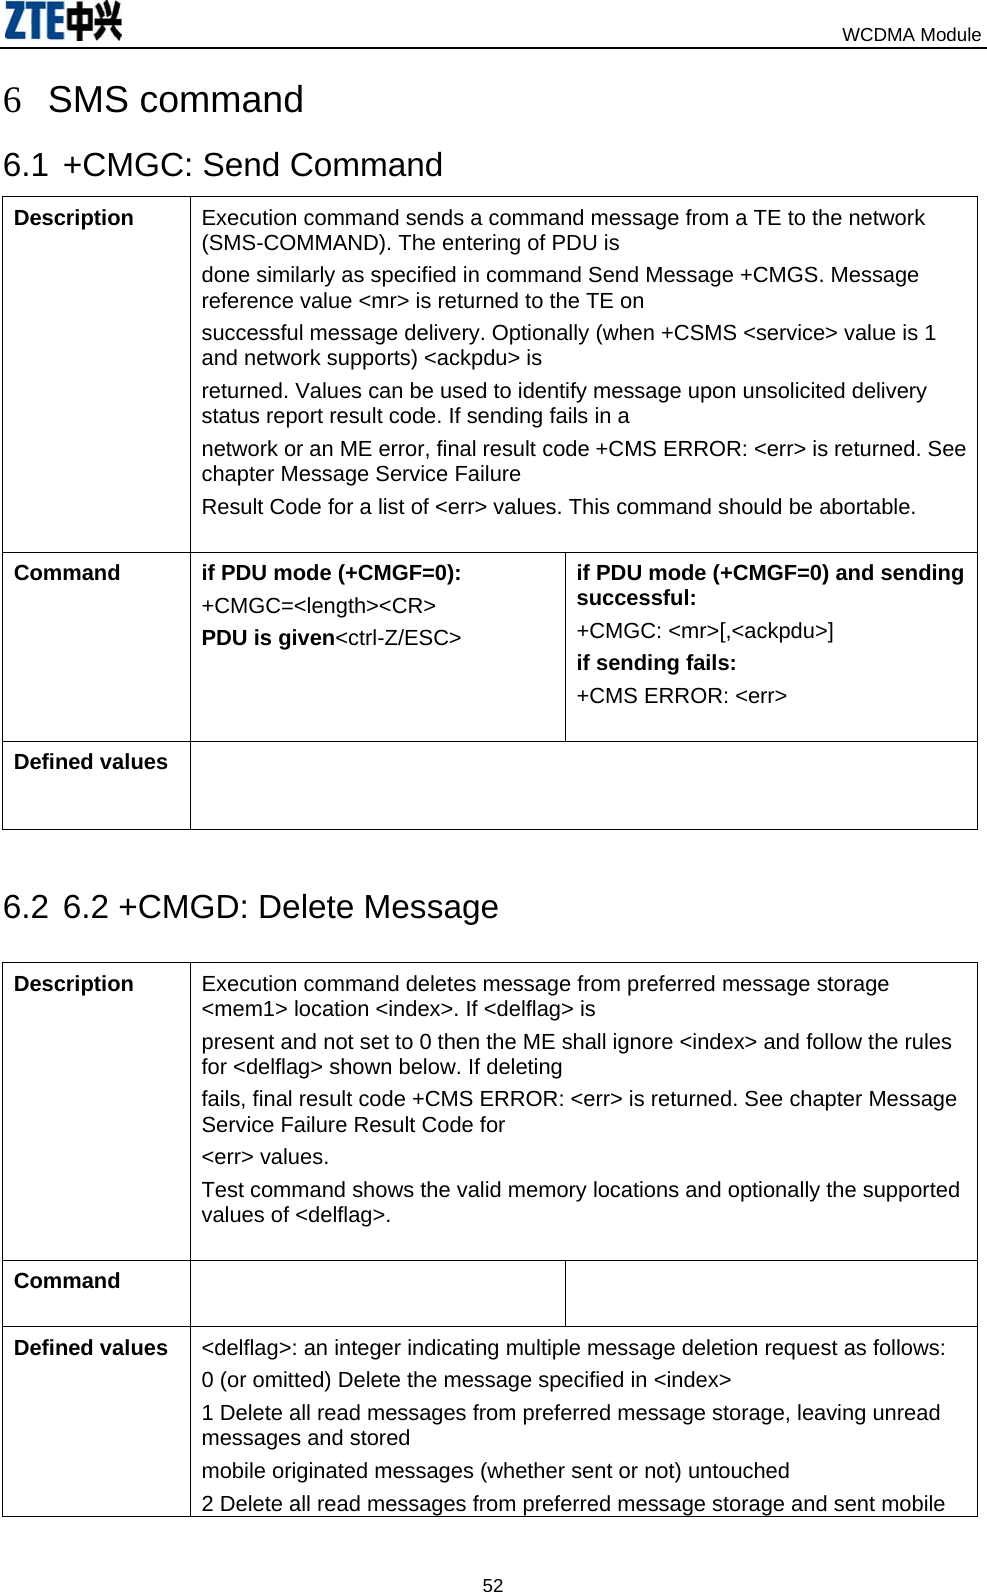                                                                            WCDMA Module  526 SMS command  6.1 +CMGC: Send Command Description  Execution command sends a command message from a TE to the network (SMS-COMMAND). The entering of PDU is done similarly as specified in command Send Message +CMGS. Message reference value &lt;mr&gt; is returned to the TE on successful message delivery. Optionally (when +CSMS &lt;service&gt; value is 1 and network supports) &lt;ackpdu&gt; is returned. Values can be used to identify message upon unsolicited delivery status report result code. If sending fails in a network or an ME error, final result code +CMS ERROR: &lt;err&gt; is returned. See chapter Message Service Failure Result Code for a list of &lt;err&gt; values. This command should be abortable.  Command  if PDU mode (+CMGF=0): +CMGC=&lt;length&gt;&lt;CR&gt; PDU is given&lt;ctrl-Z/ESC&gt;  if PDU mode (+CMGF=0) and sending successful: +CMGC: &lt;mr&gt;[,&lt;ackpdu&gt;] if sending fails: +CMS ERROR: &lt;err&gt;  Defined values    6.2 6.2 +CMGD: Delete Message  Description  Execution command deletes message from preferred message storage &lt;mem1&gt; location &lt;index&gt;. If &lt;delflag&gt; is present and not set to 0 then the ME shall ignore &lt;index&gt; and follow the rules for &lt;delflag&gt; shown below. If deleting fails, final result code +CMS ERROR: &lt;err&gt; is returned. See chapter Message Service Failure Result Code for &lt;err&gt; values. Test command shows the valid memory locations and optionally the supported values of &lt;delflag&gt;.  Command    Defined values  &lt;delflag&gt;: an integer indicating multiple message deletion request as follows: 0 (or omitted) Delete the message specified in &lt;index&gt; 1 Delete all read messages from preferred message storage, leaving unread messages and stored mobile originated messages (whether sent or not) untouched 2 Delete all read messages from preferred message storage and sent mobile 